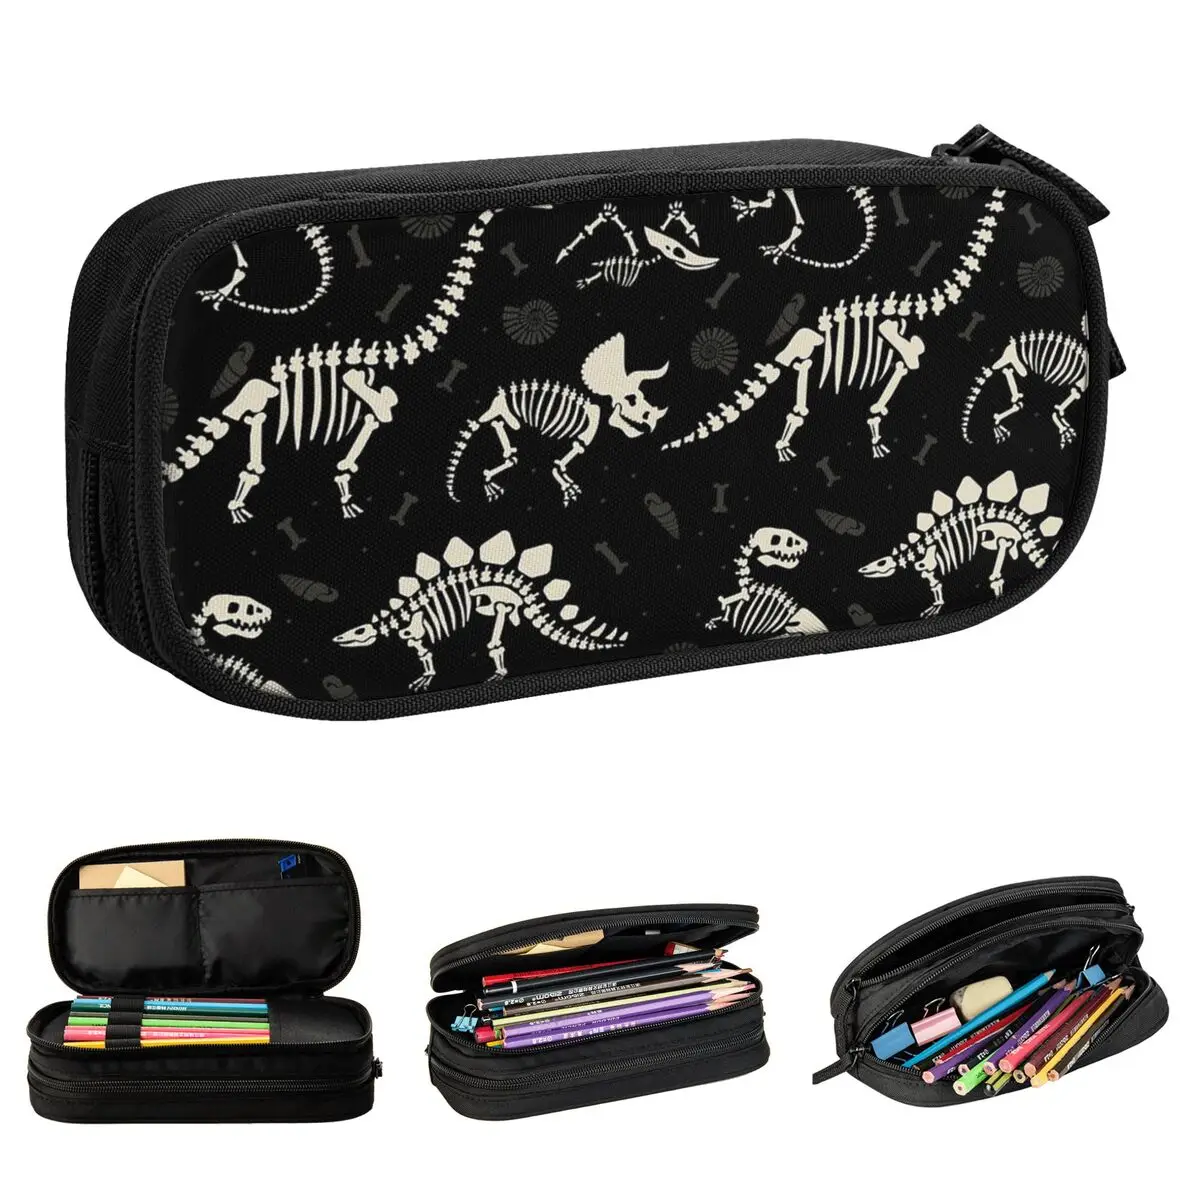 Dinosaur Fossils Pencil Cases New Halloween Pen Bag Girls Boys Large Storage Students School Gift Pencil Pouch